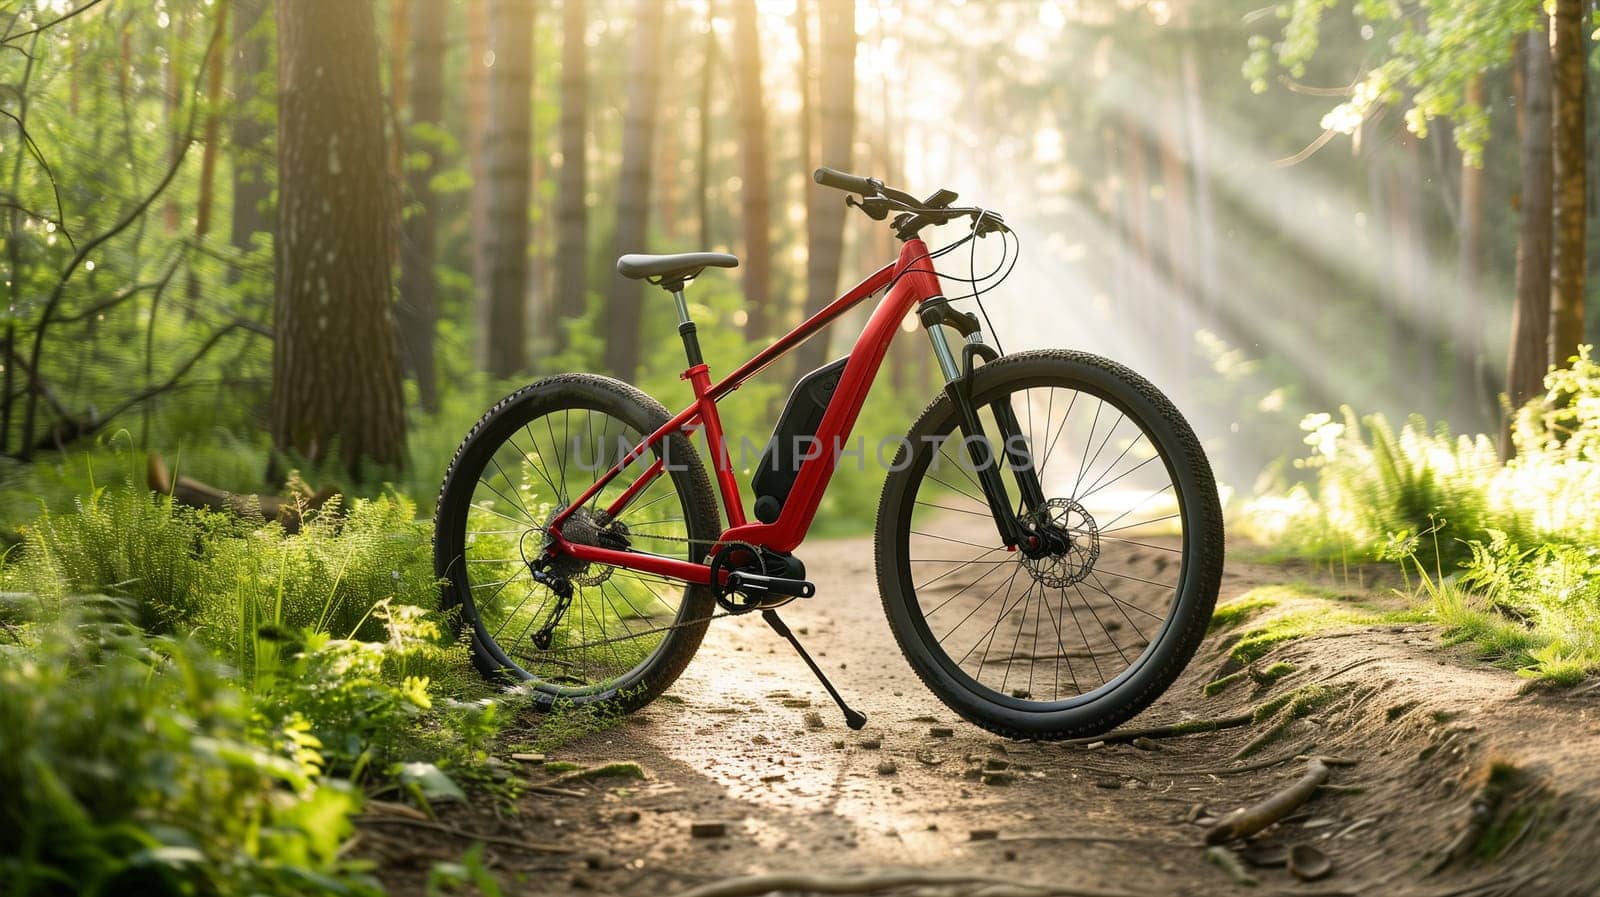 A red mountain bike is parked among trees in a wooded area, surrounded by green foliage and dappled sunlight.